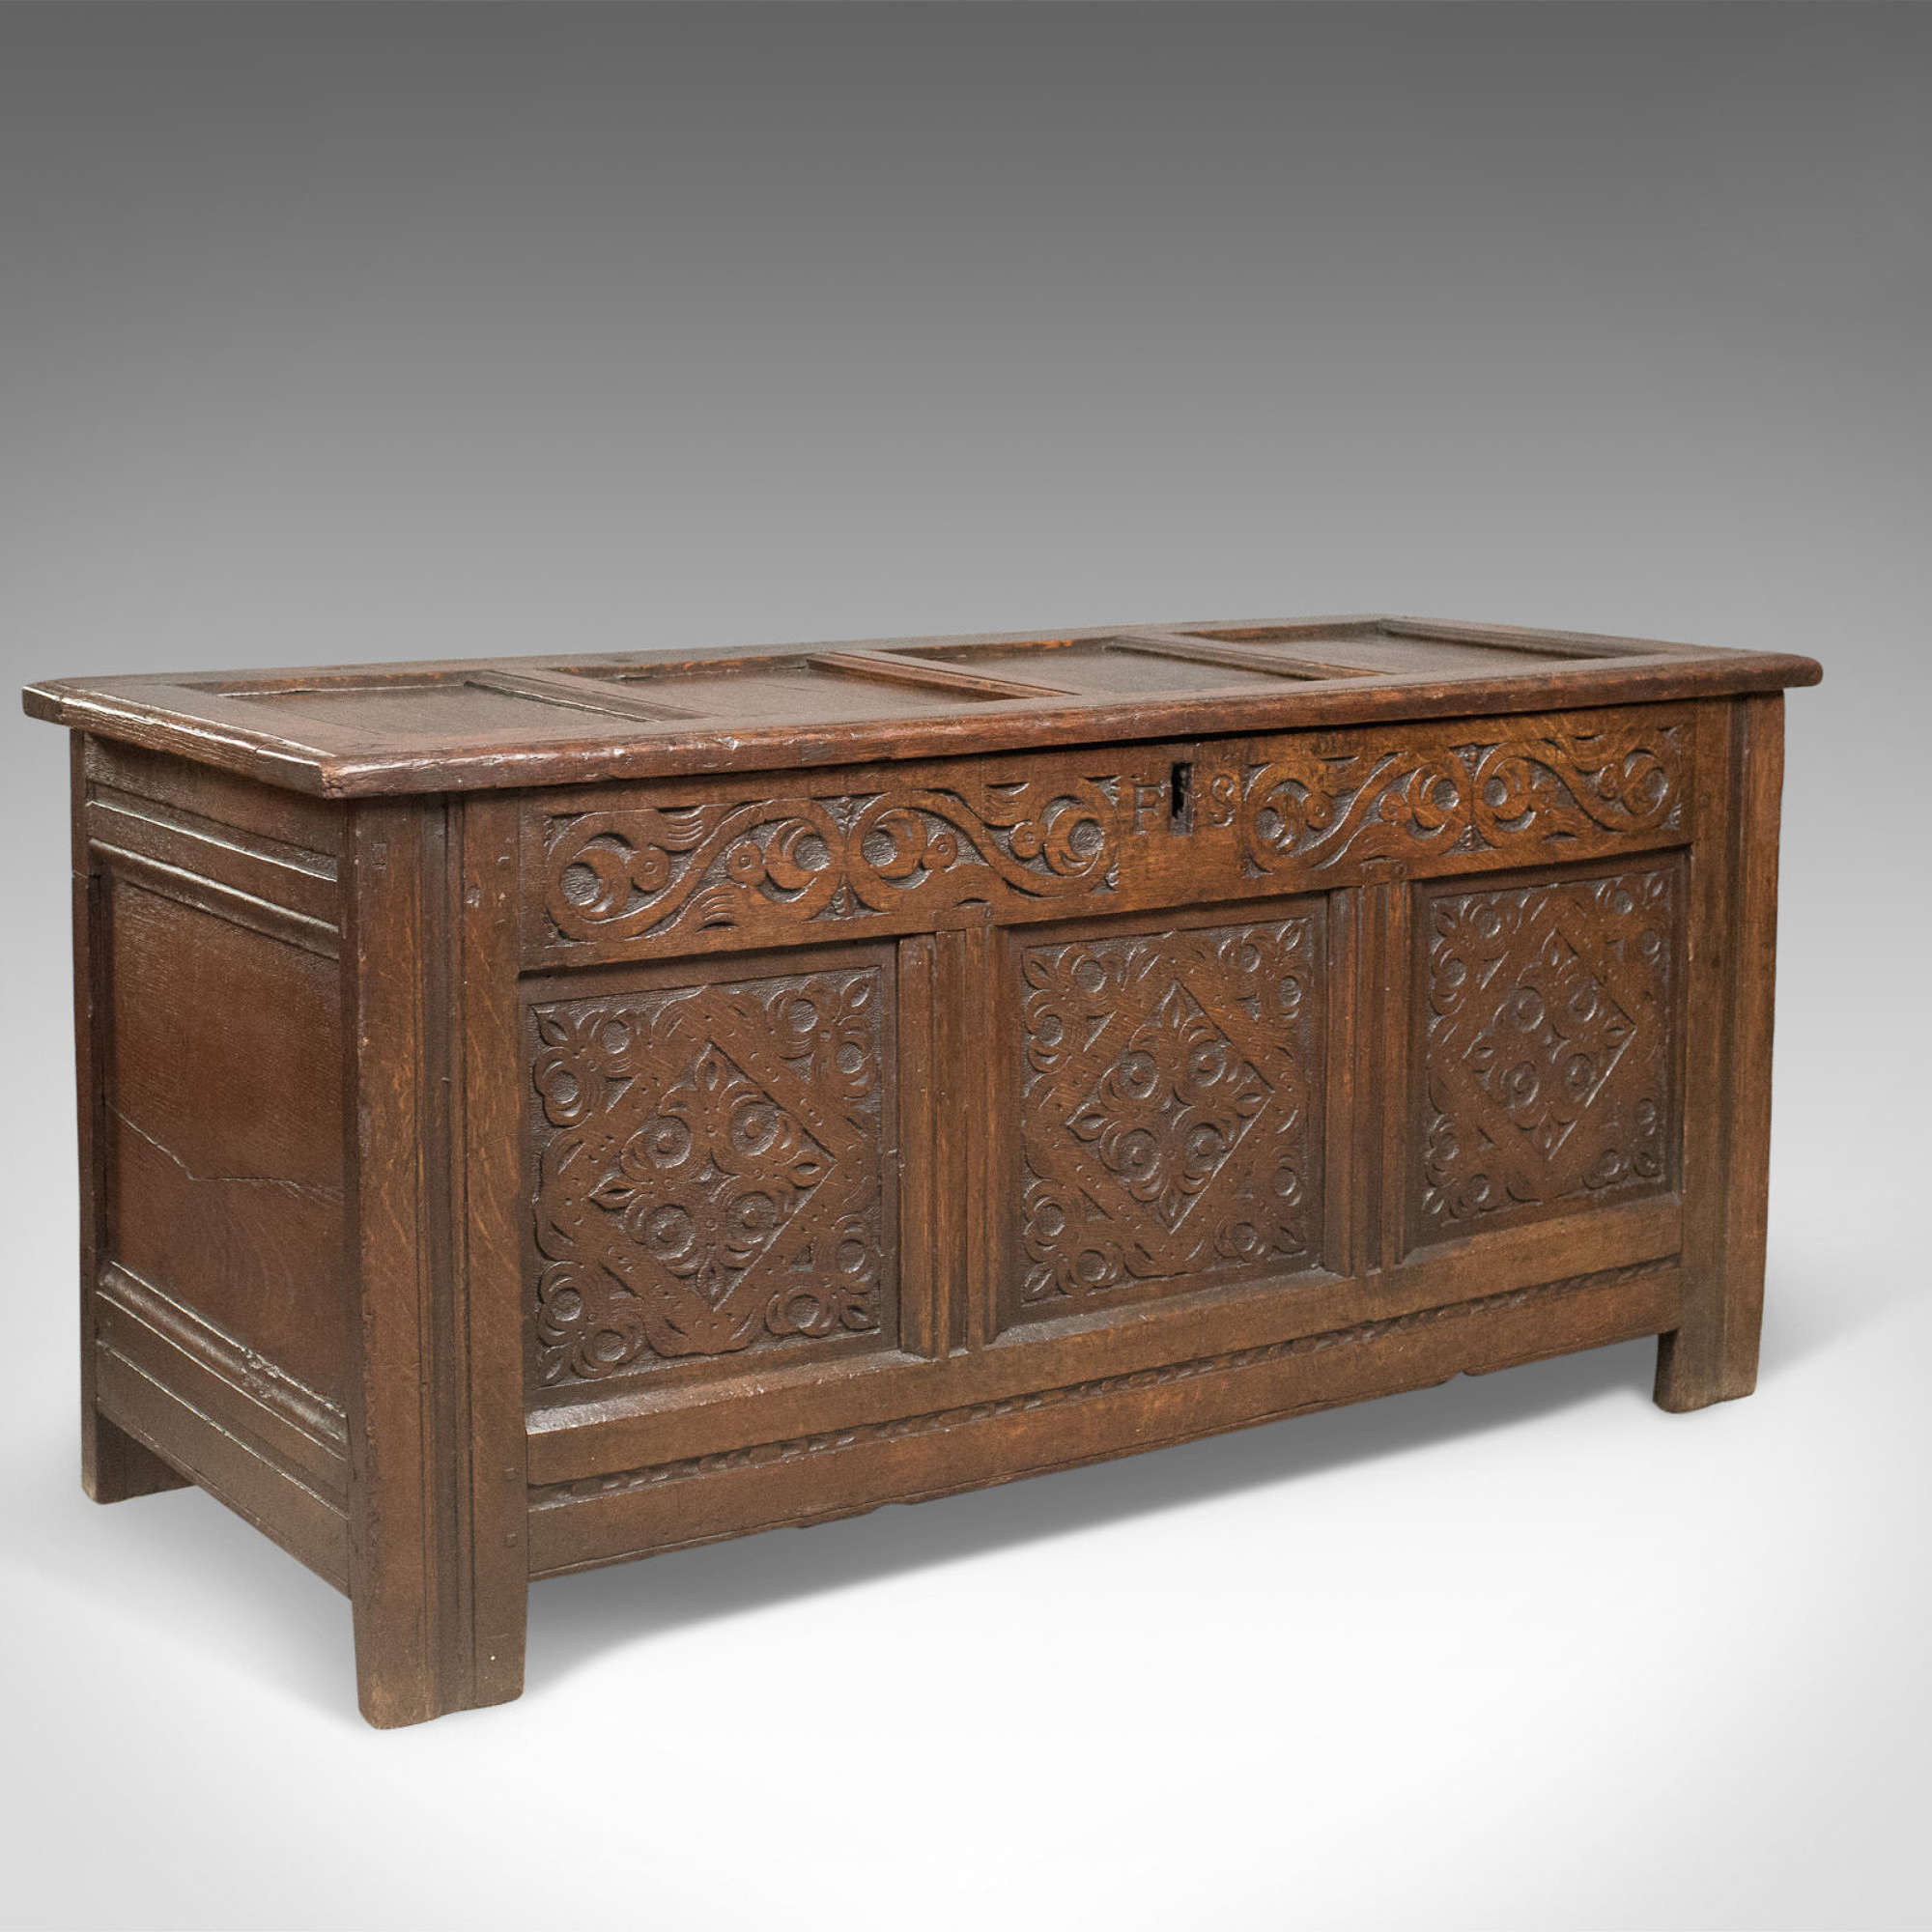 Carved Antique Coffer, English Oak Joined Chest, Trunk C.1700